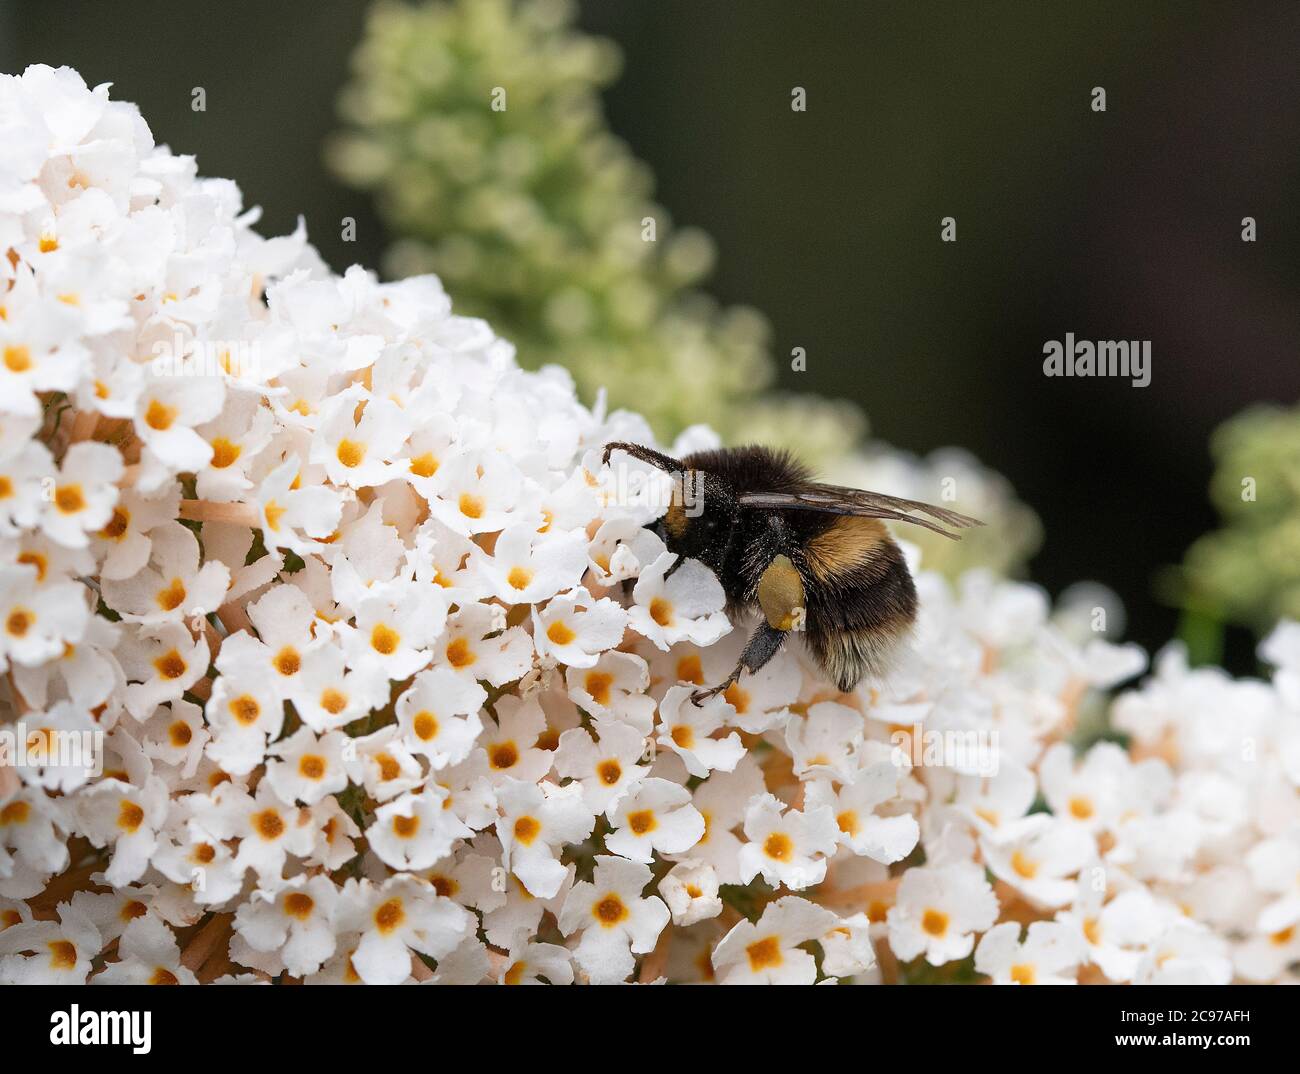 A Buff-Tailed Bumblebee Feeding on Pollen and Nectar on a White Buddleia Flower in a Garden in Alsager Cheshire England United Kingdom UK Stock Photo